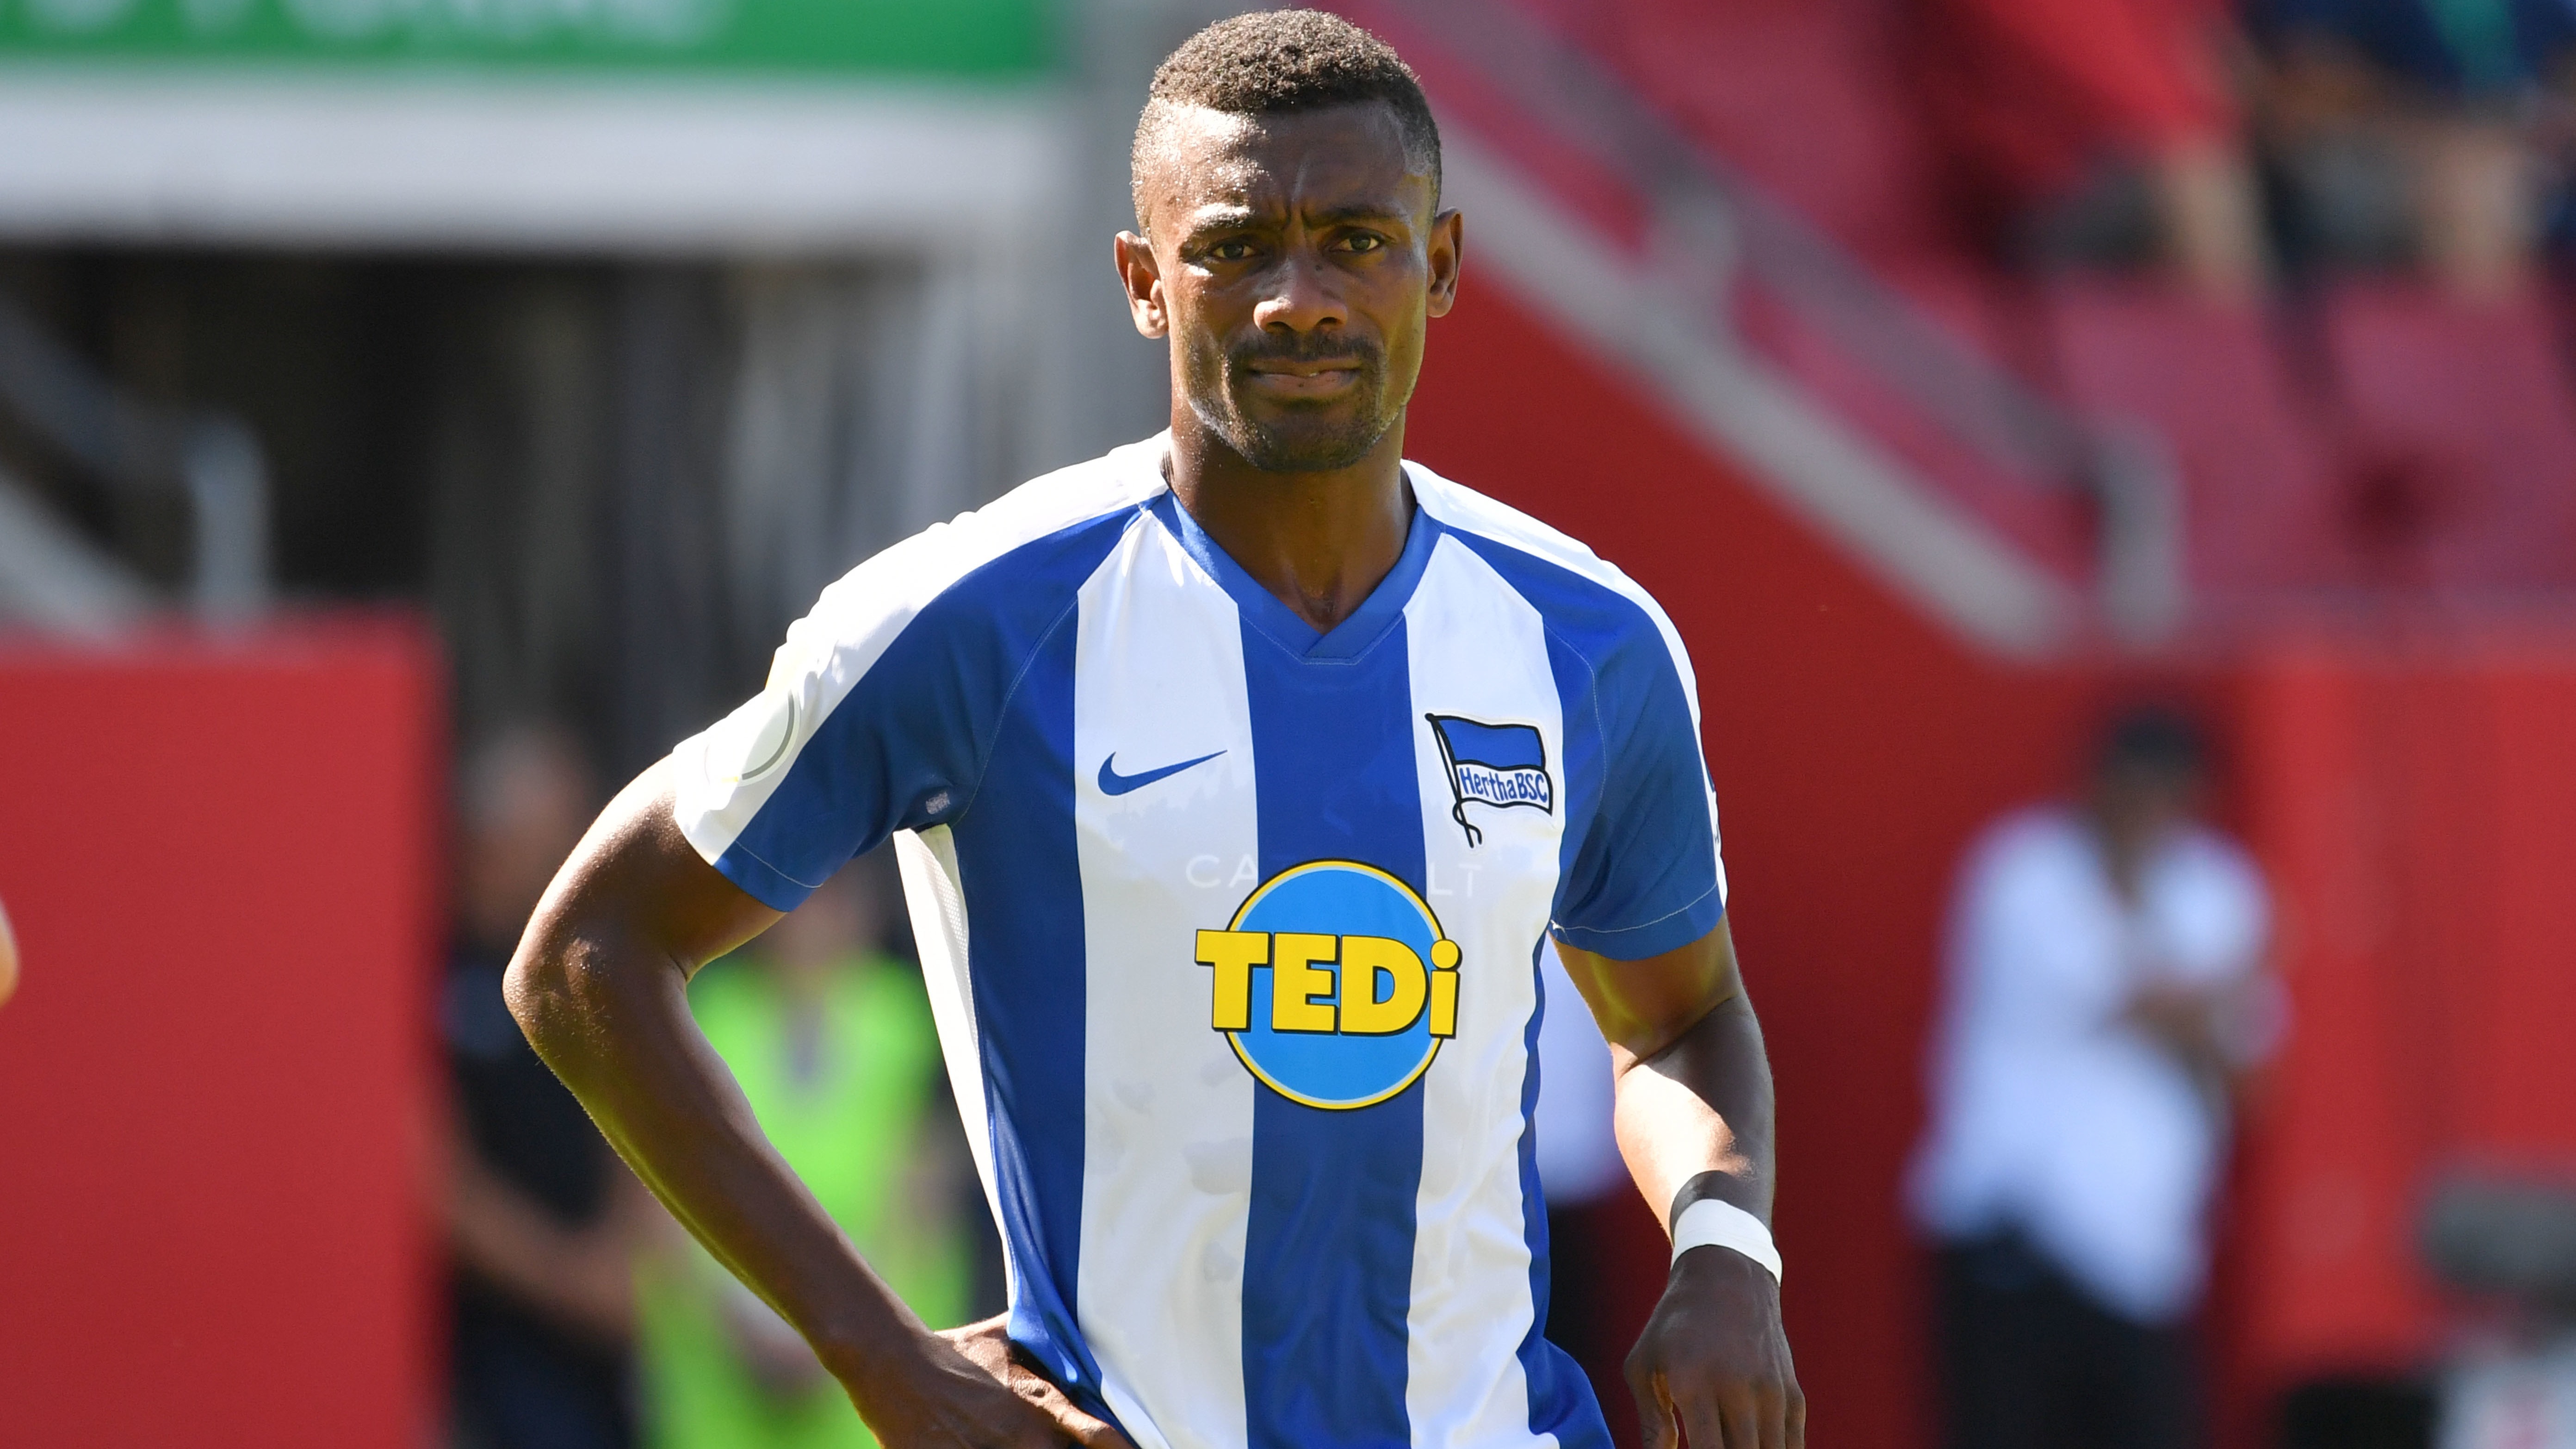 Kalou by Berlin after breaking social distancing rules | ITV Football